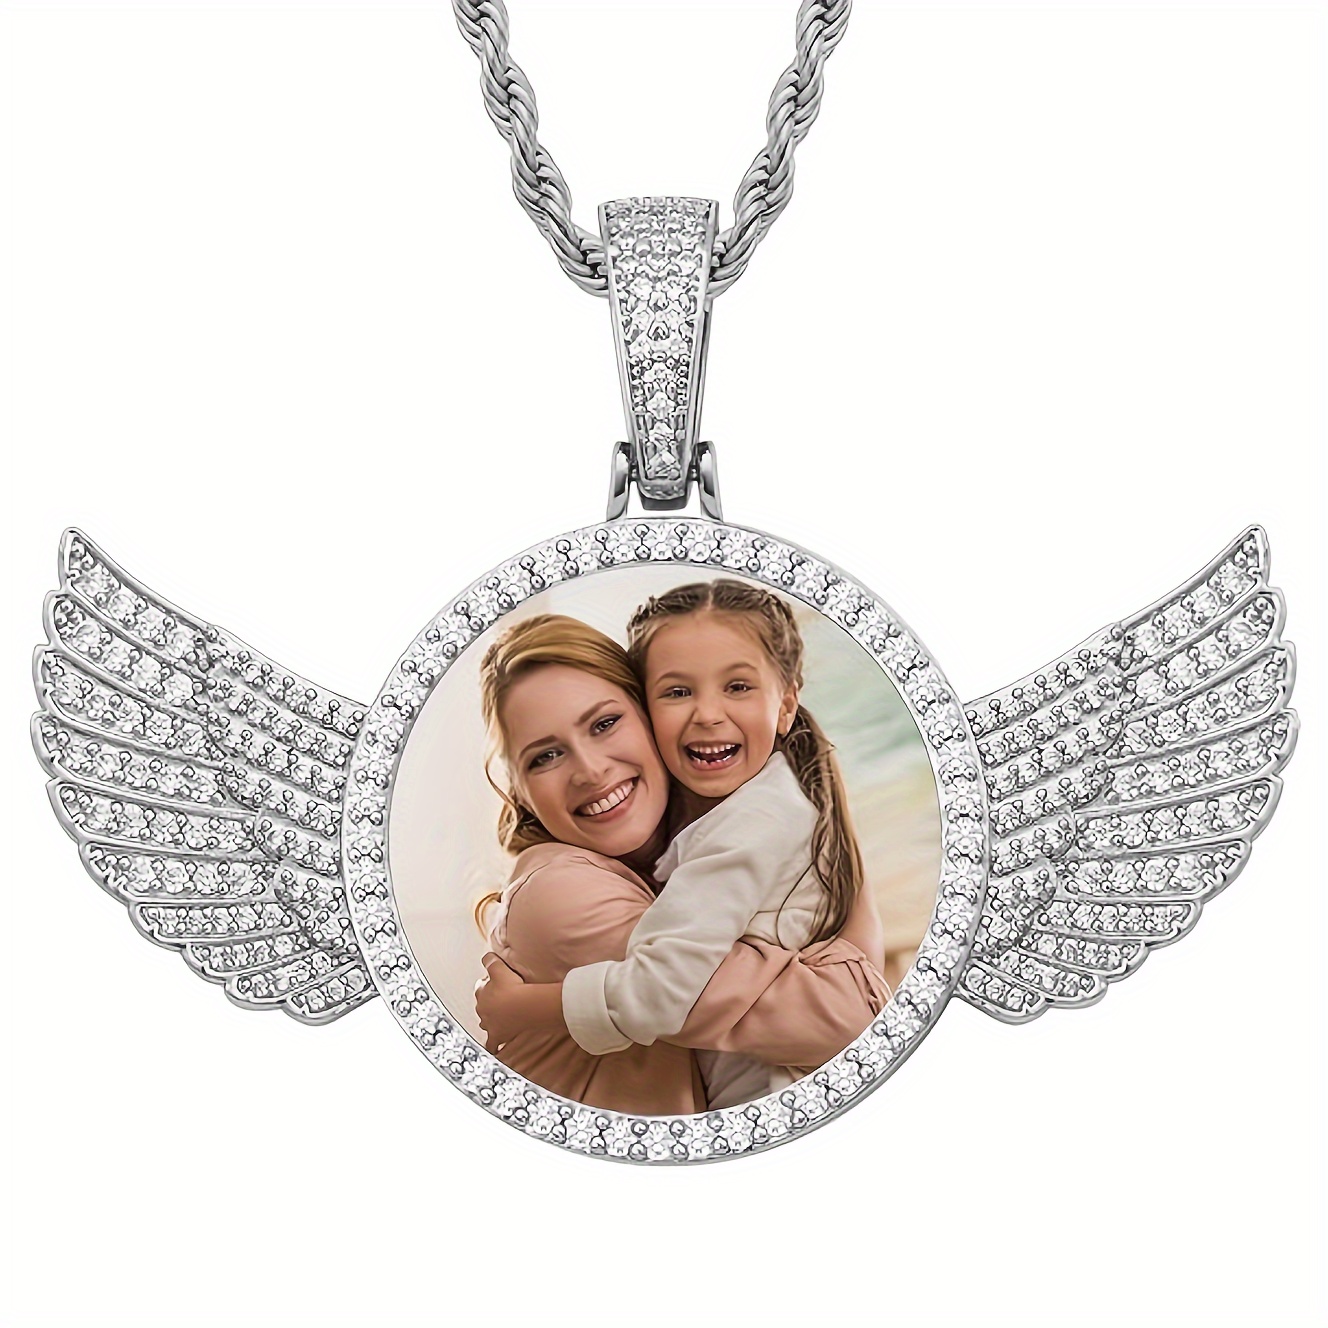 

Customized Picture Necklace, Hip-hop Style Personalized Pendant Necklace Jewelry With Gift Box Packaging, Wing Necklace With Pendant Customized Image Jewelry Gift